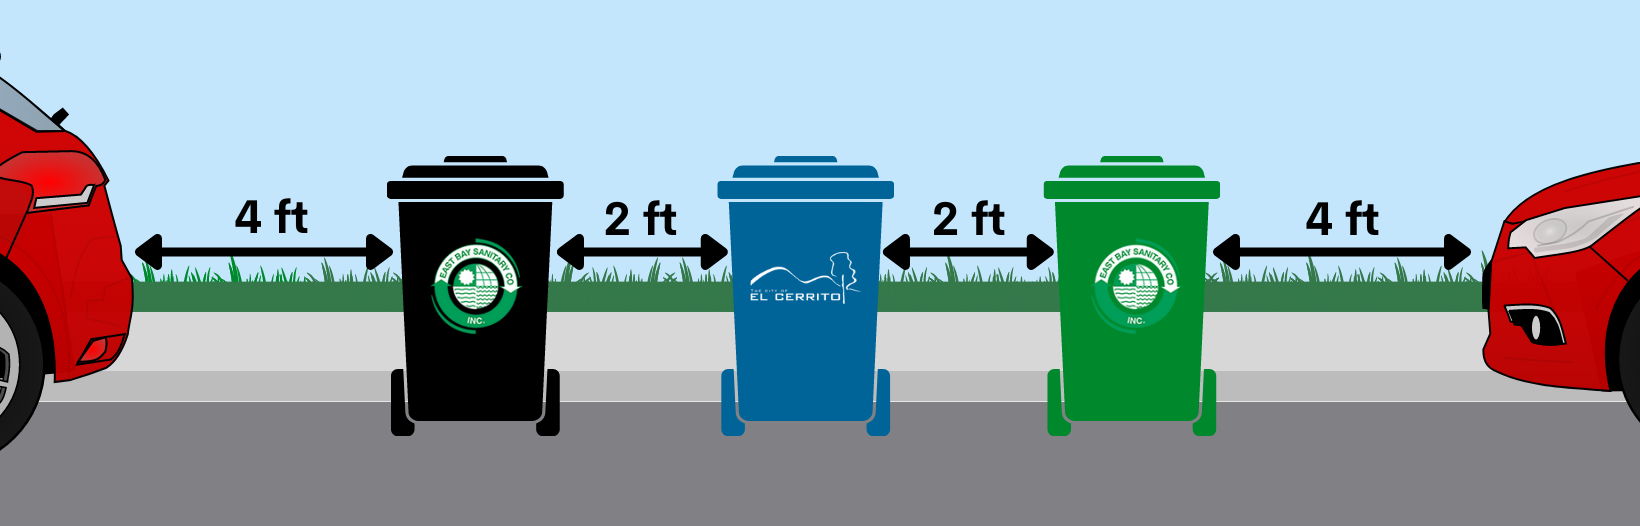 Illustration of three carts at curb with proper spacing between two cars.